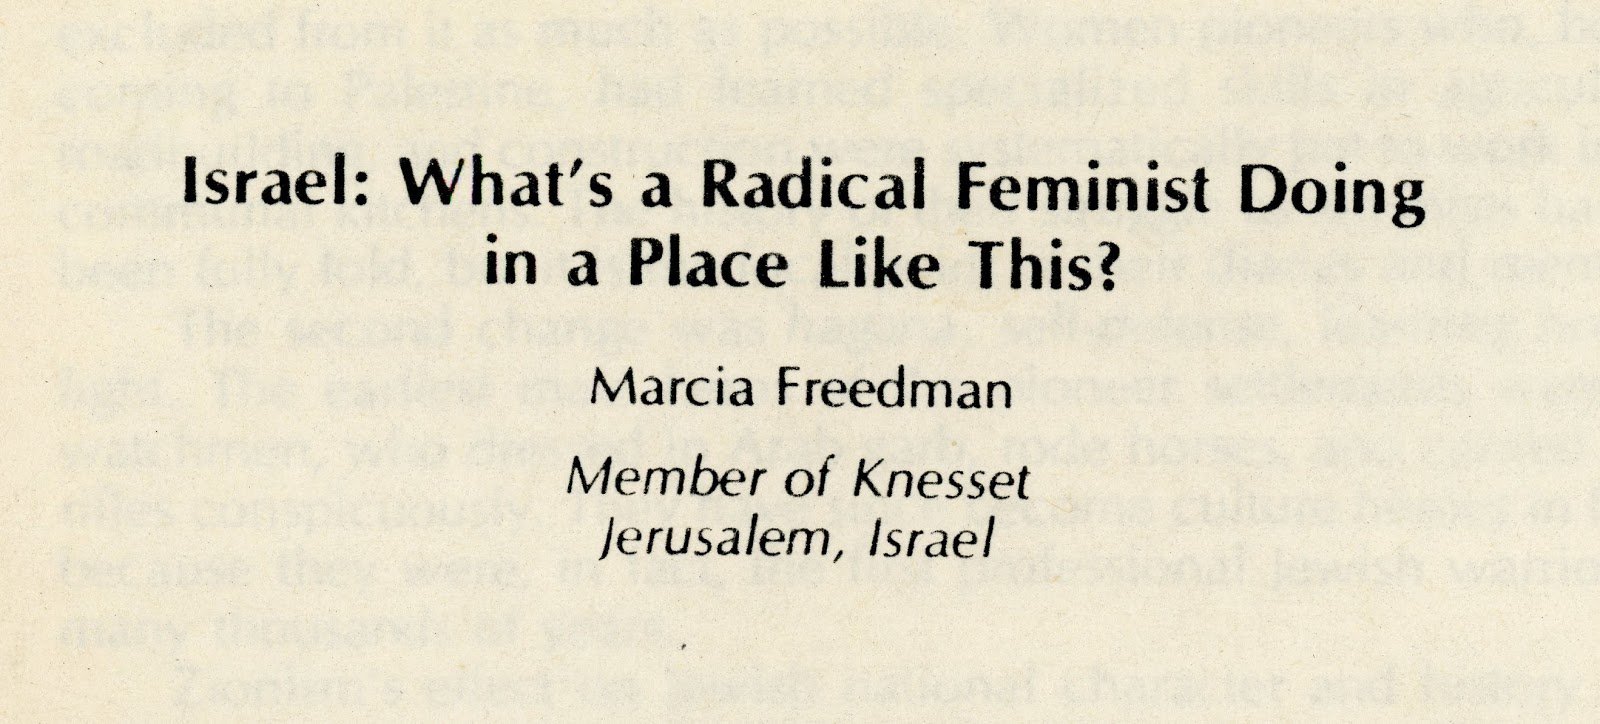 Newspaper article by Freedman entitled "Israel: What's a Radical  Feminist Doing in a Place Like This?"